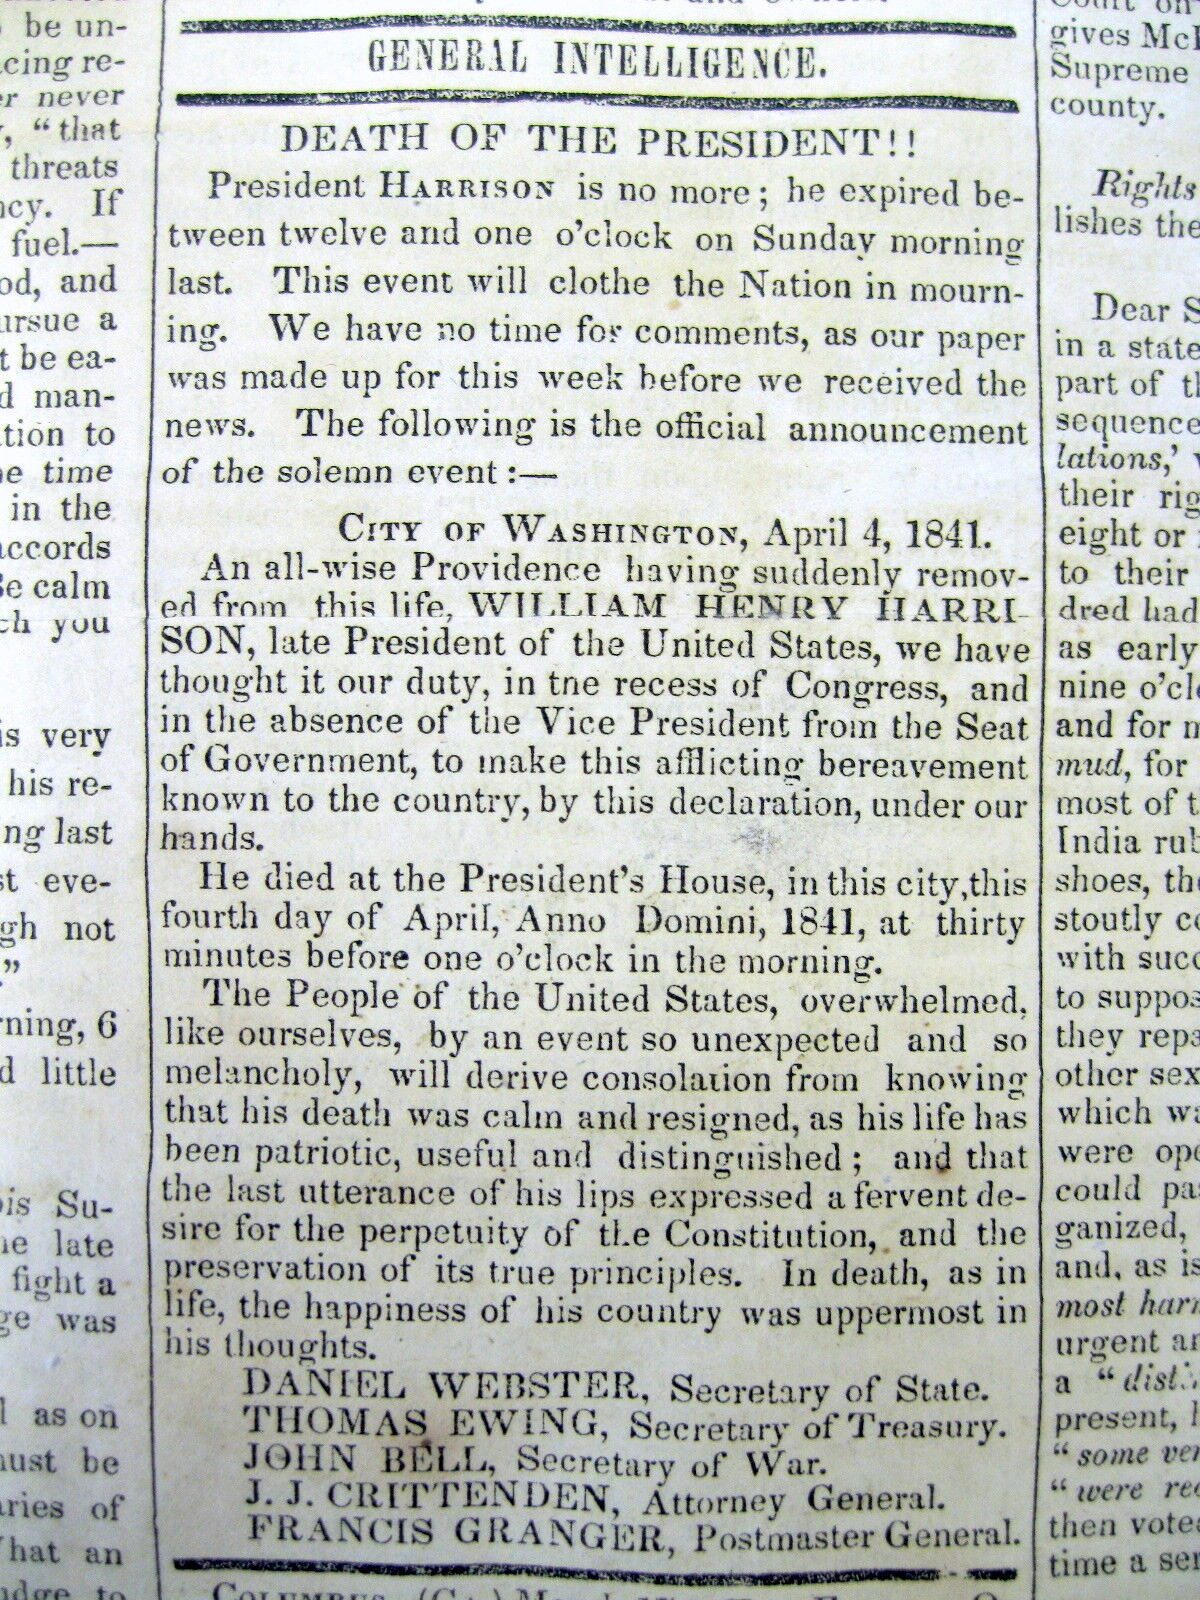 1841 newspaper with a 1st report DEATH of US PRESIDENT WILLIAM HENRY HARRISON